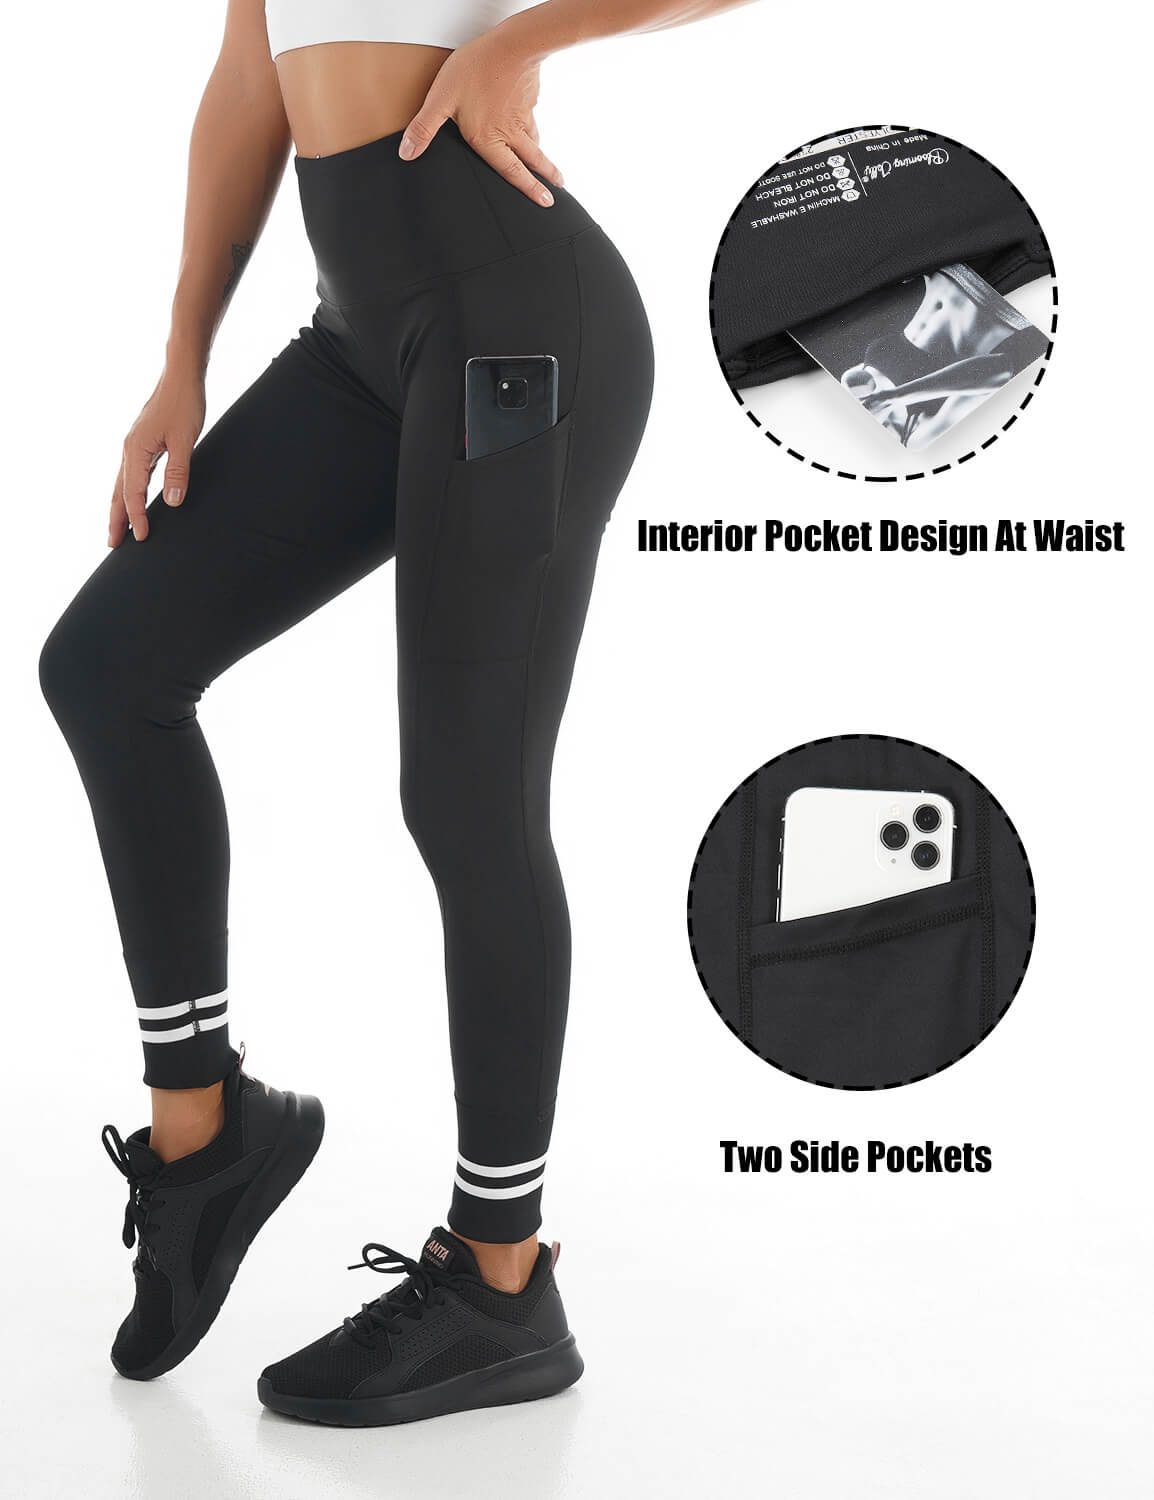 Blooming Jelly_Workout Training Fitness Leggings_Black_257210_02_Women Athletic Comfy Outfits_Bottoms_Leggings